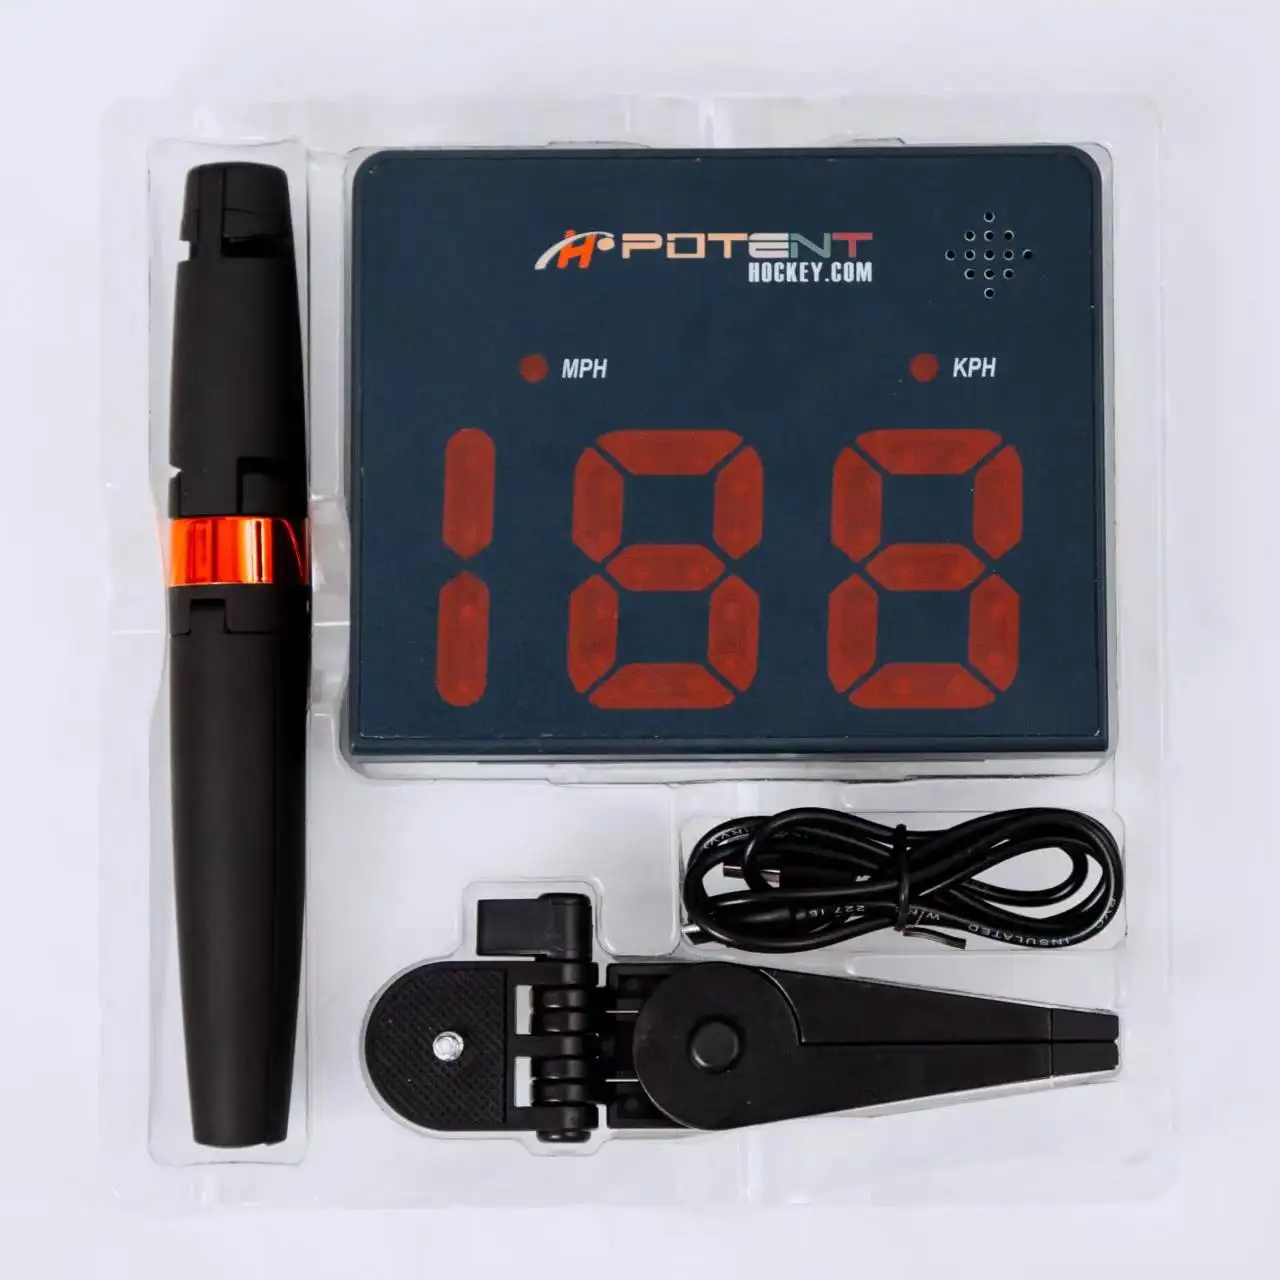 Potent Speed Radar Gun Measure The Shots' Speed Instantly And Accurately For Hockey Golf Baseba